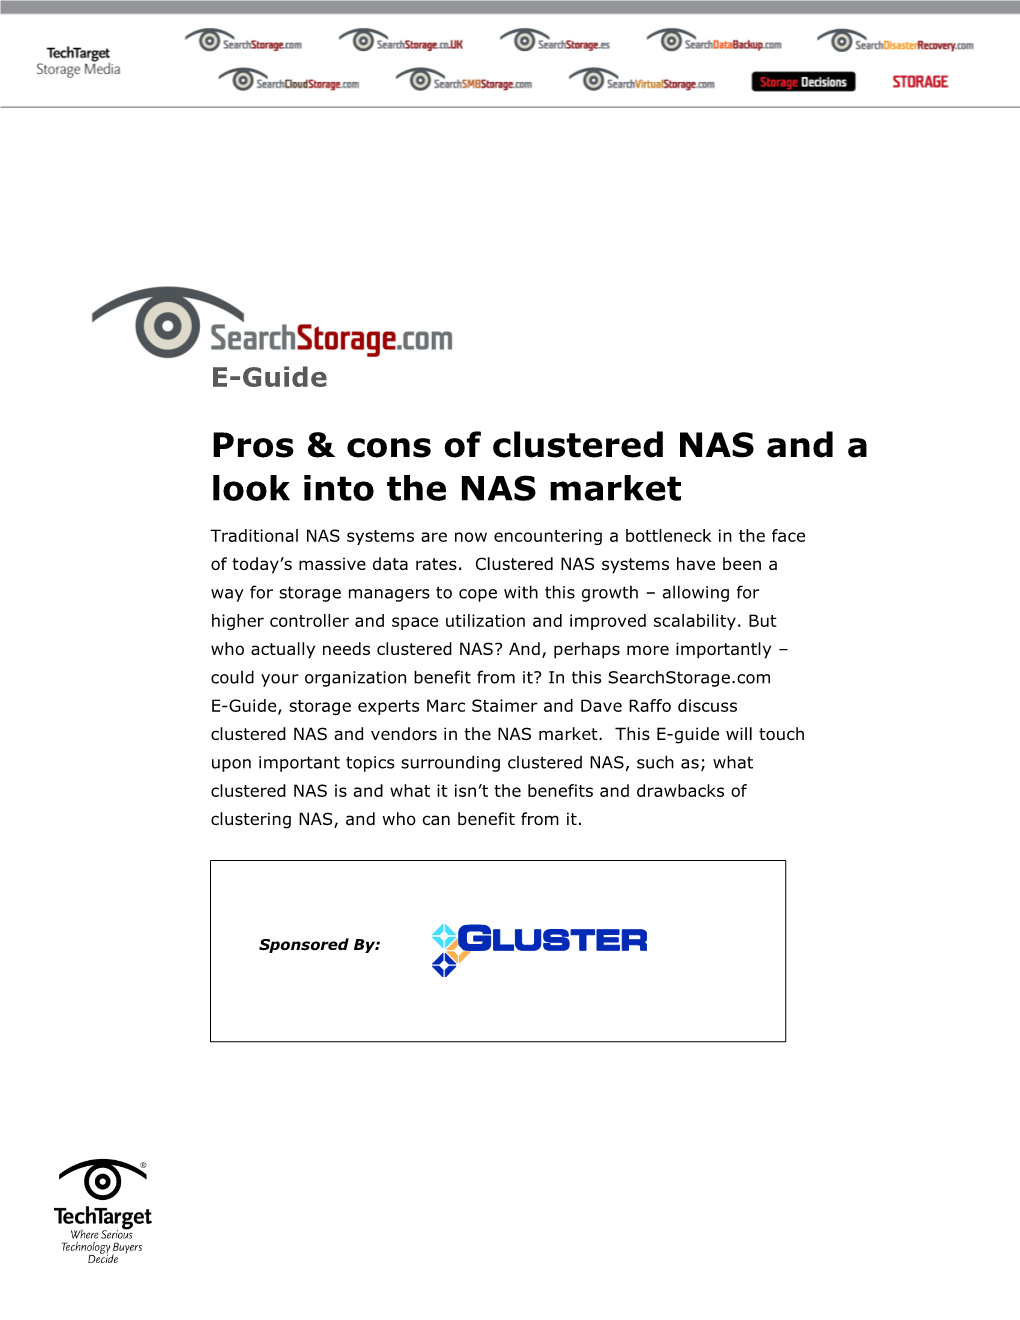 Pros & Cons of Clustered NAS and a Look Into the NAS Market